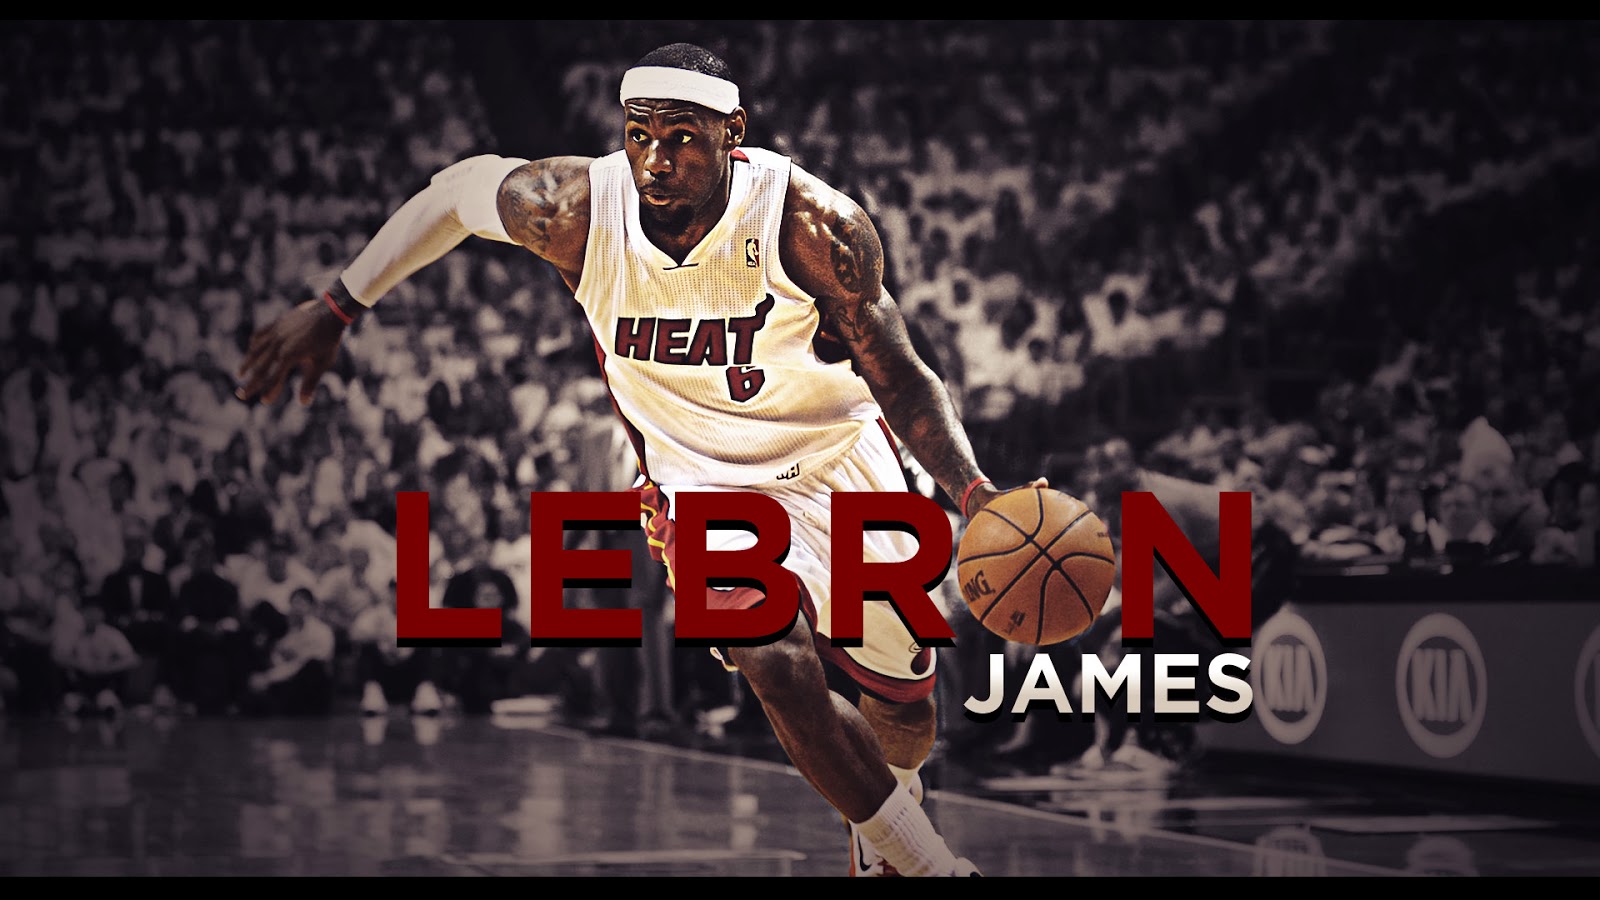 Its All About Basketball Lebron James New Wallpaper 2014 1600x900